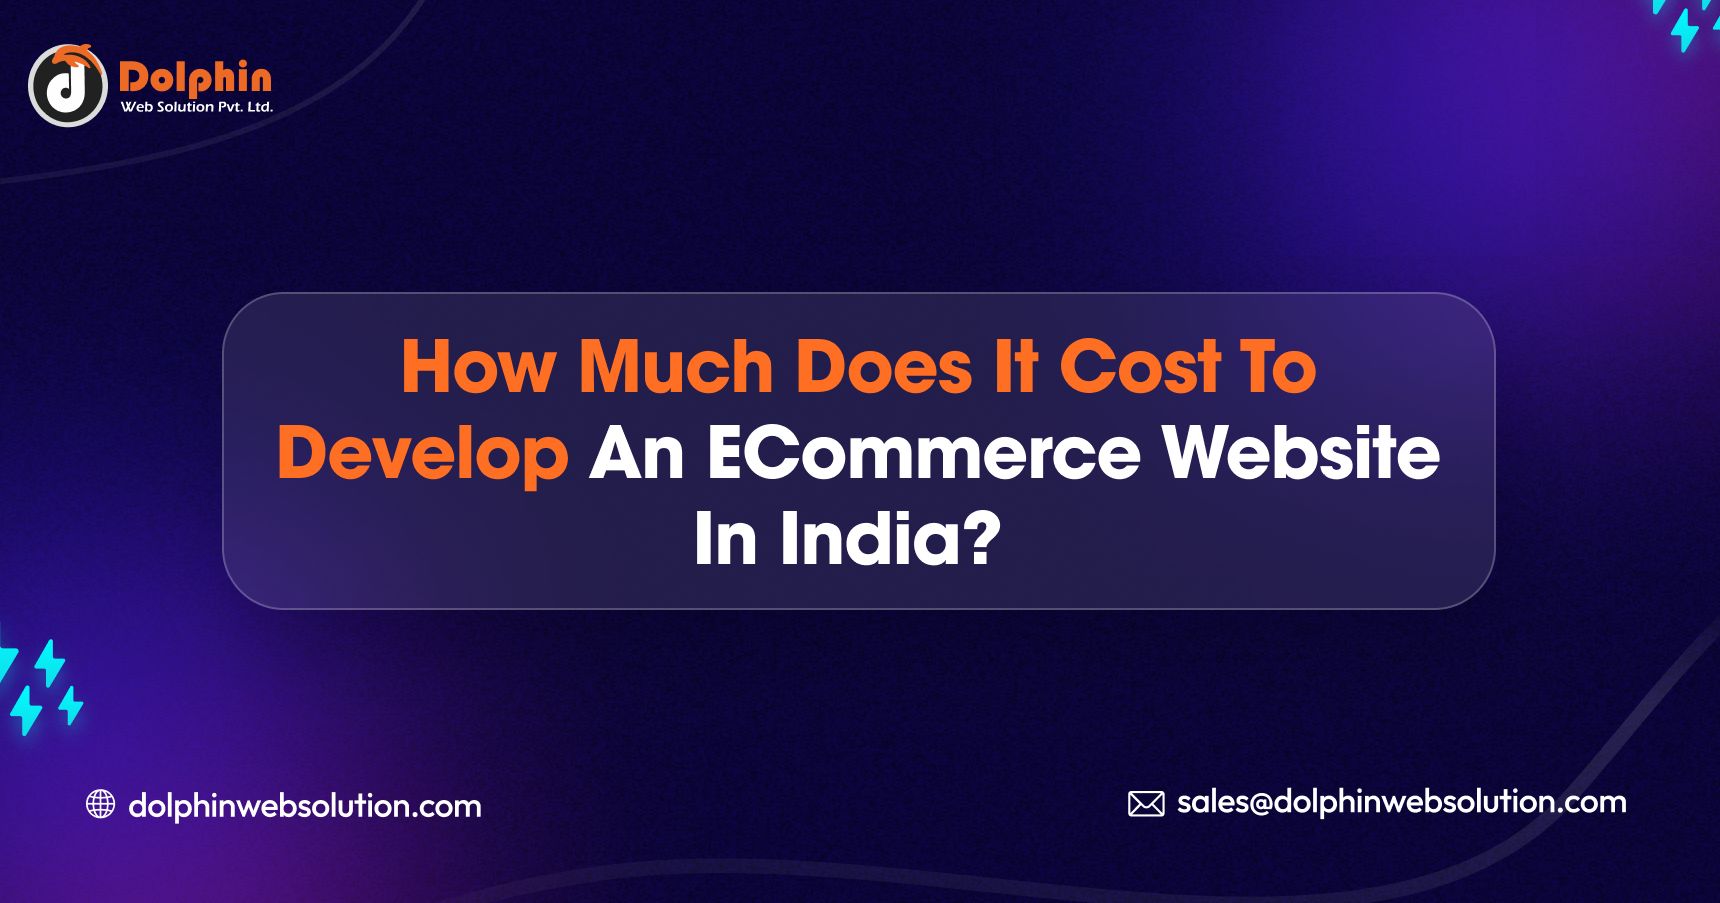 How Much Does It Cost to Develop an eCommerce Website in India?